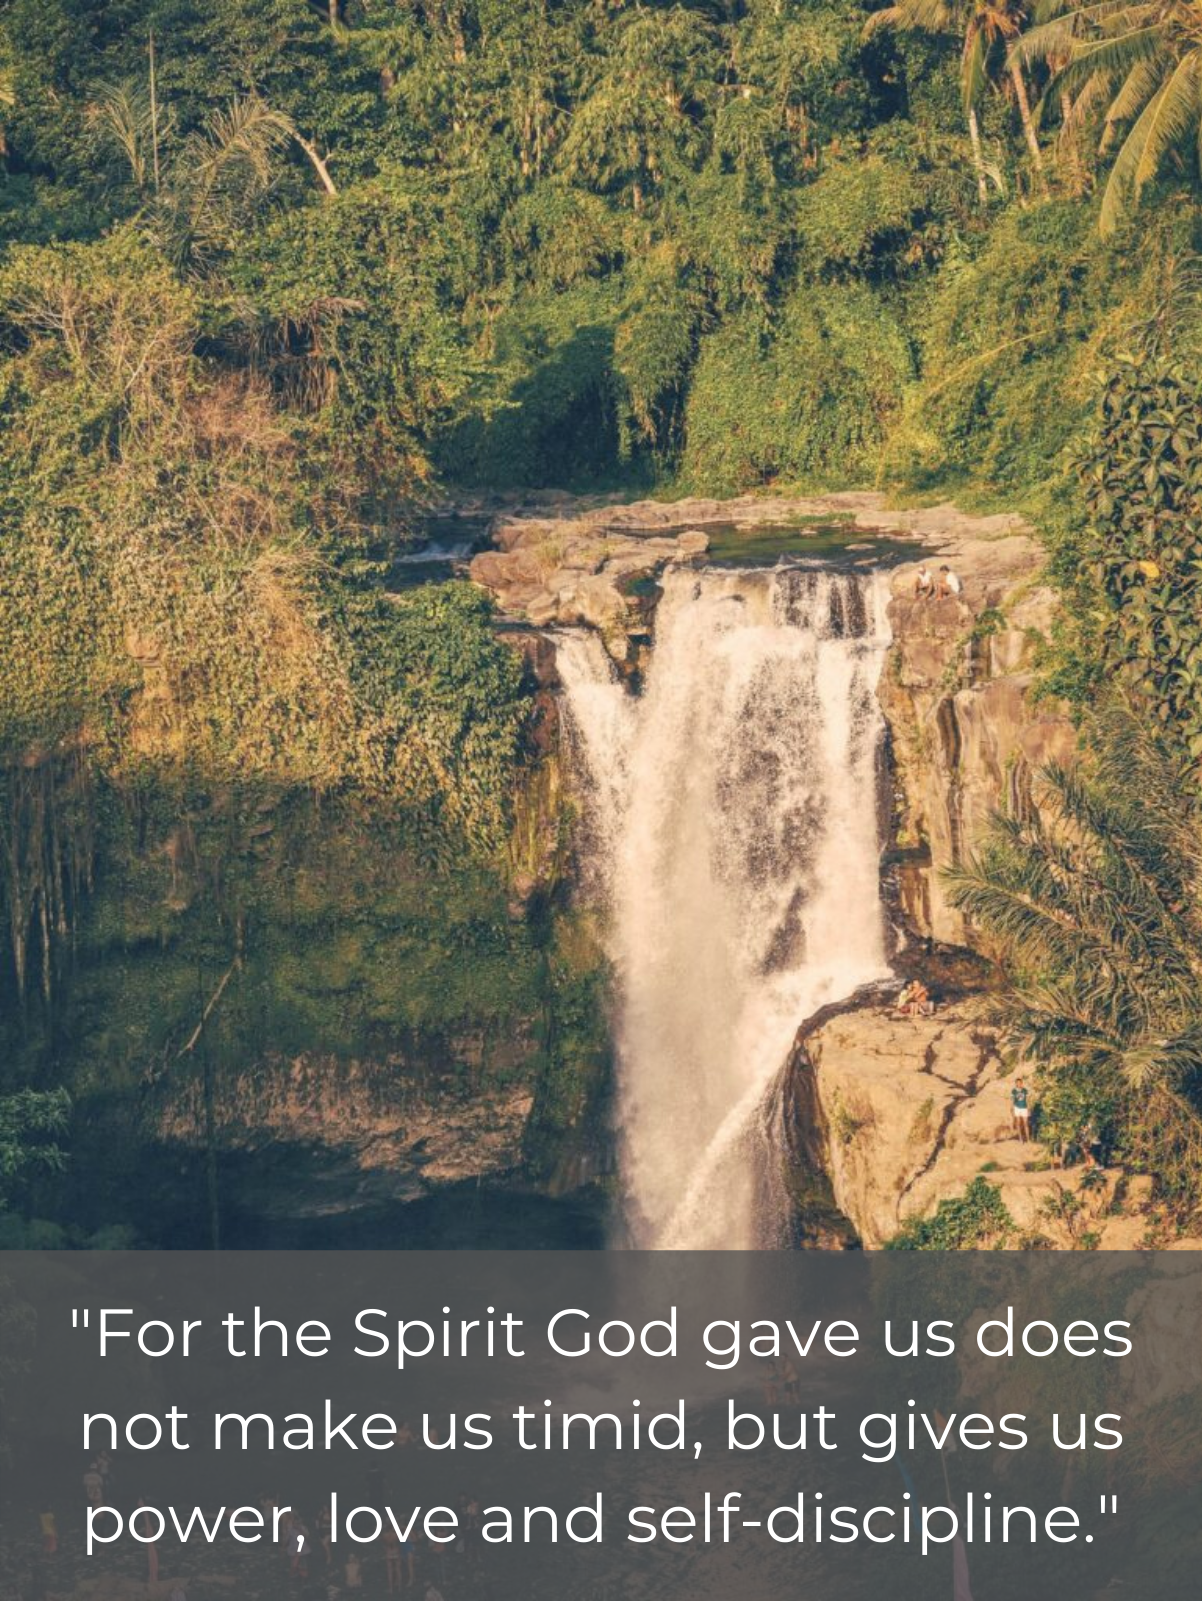 For the Spirit God gave us does not make us timid, but gives us power, love and self-discipline.